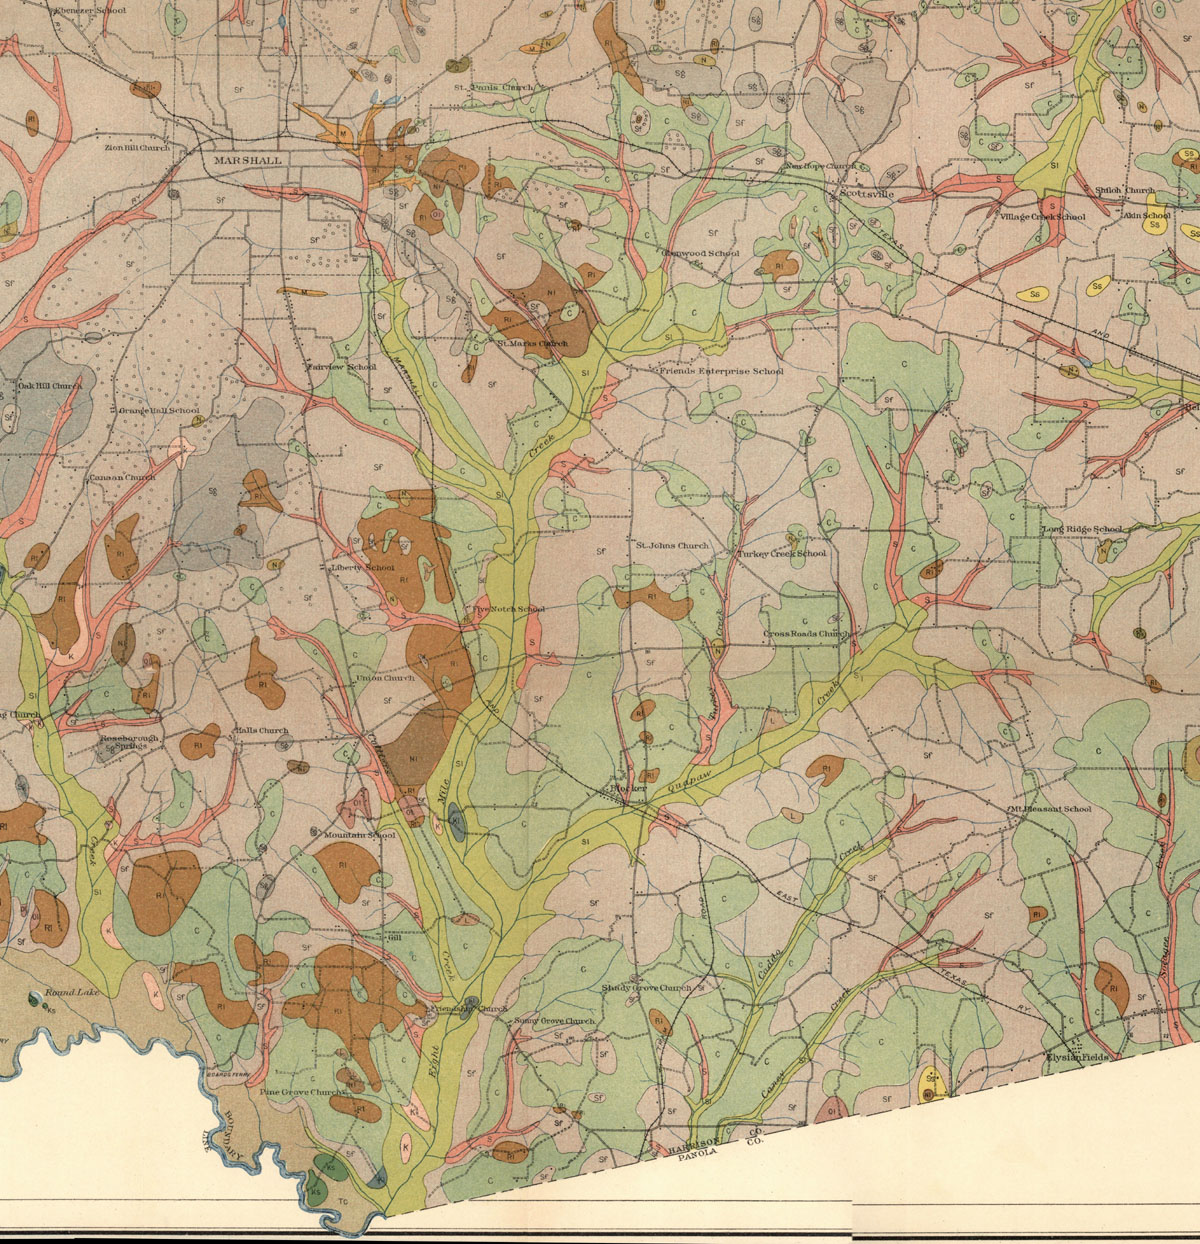 Marshall & East Texas Railway Company (Tex.), map showing route from Marshall to Elysian Fields in 1912.